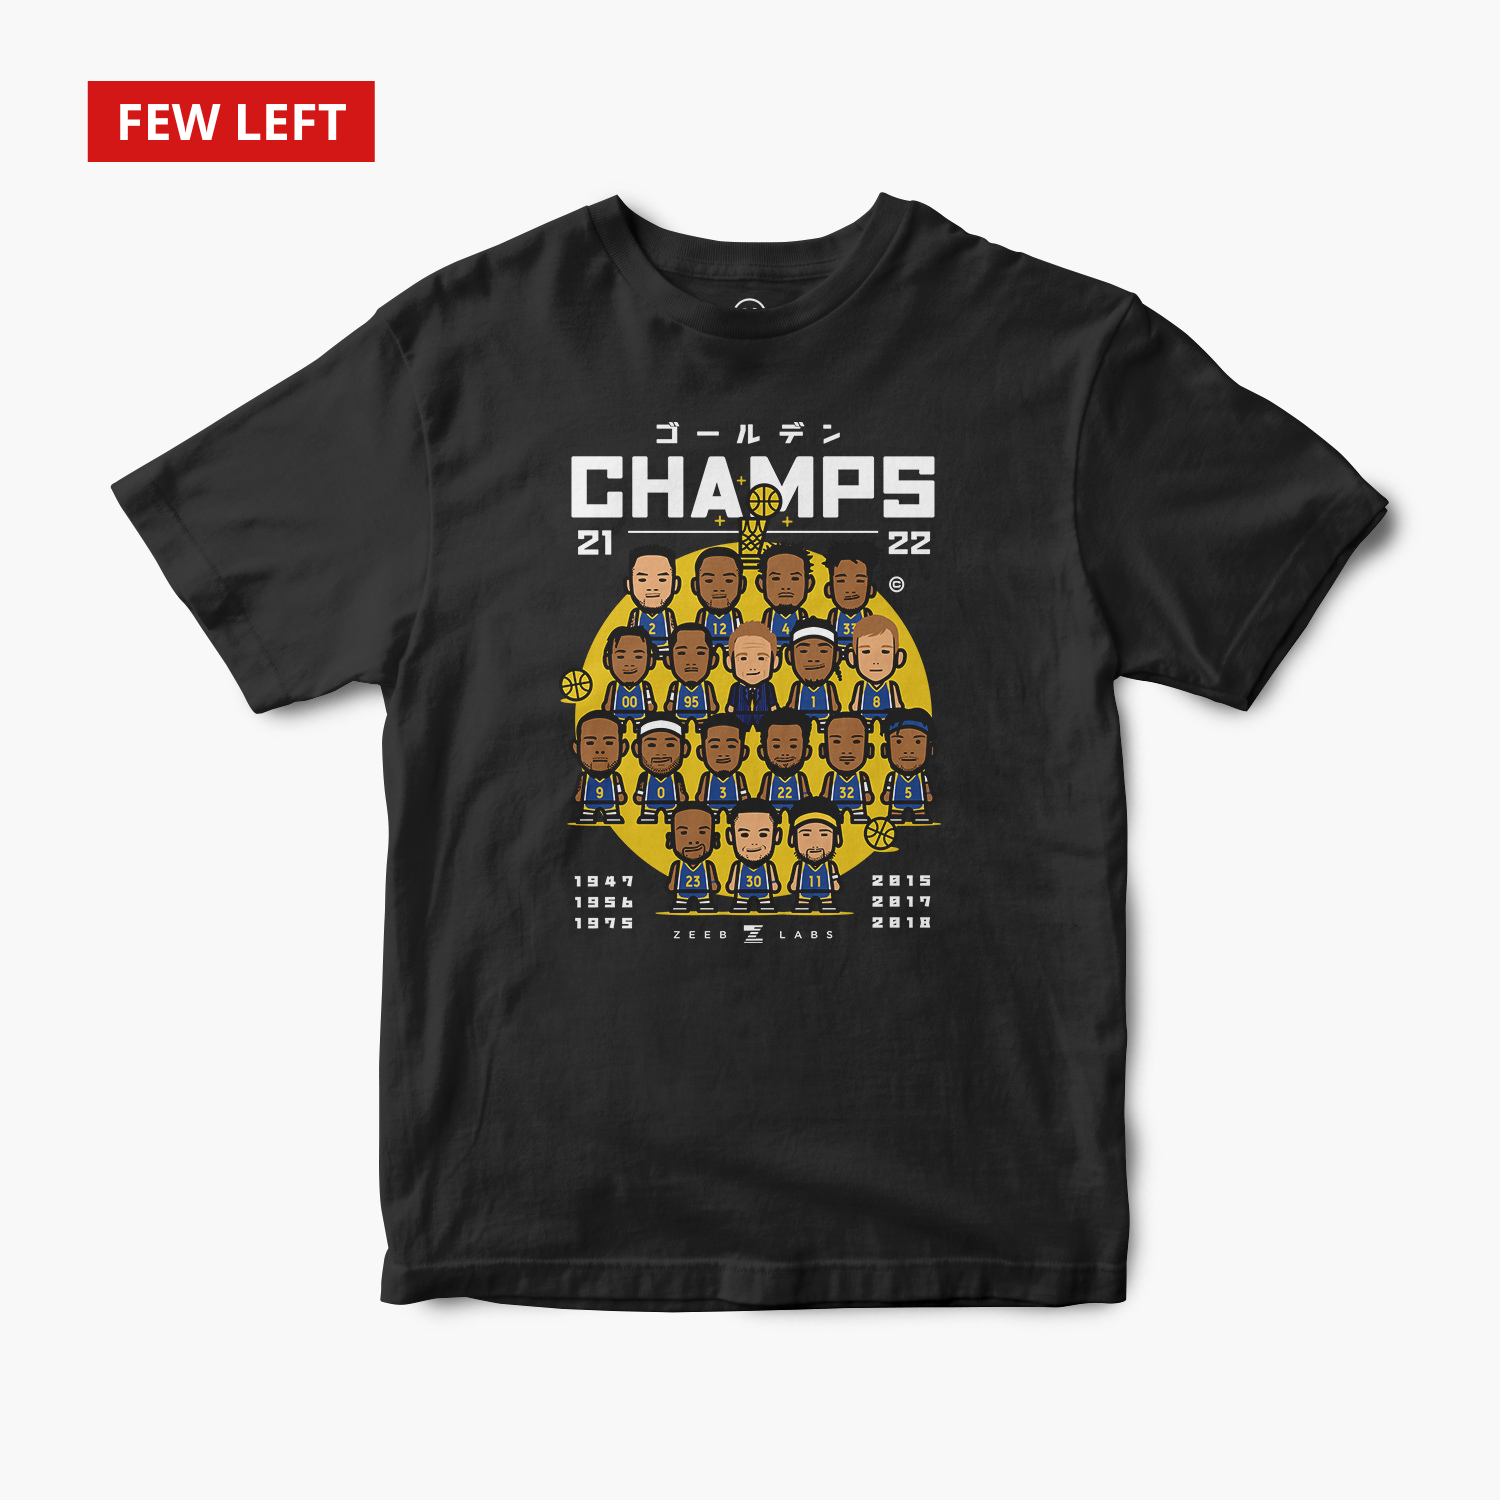 22Champs—Tee—Blk—optFront